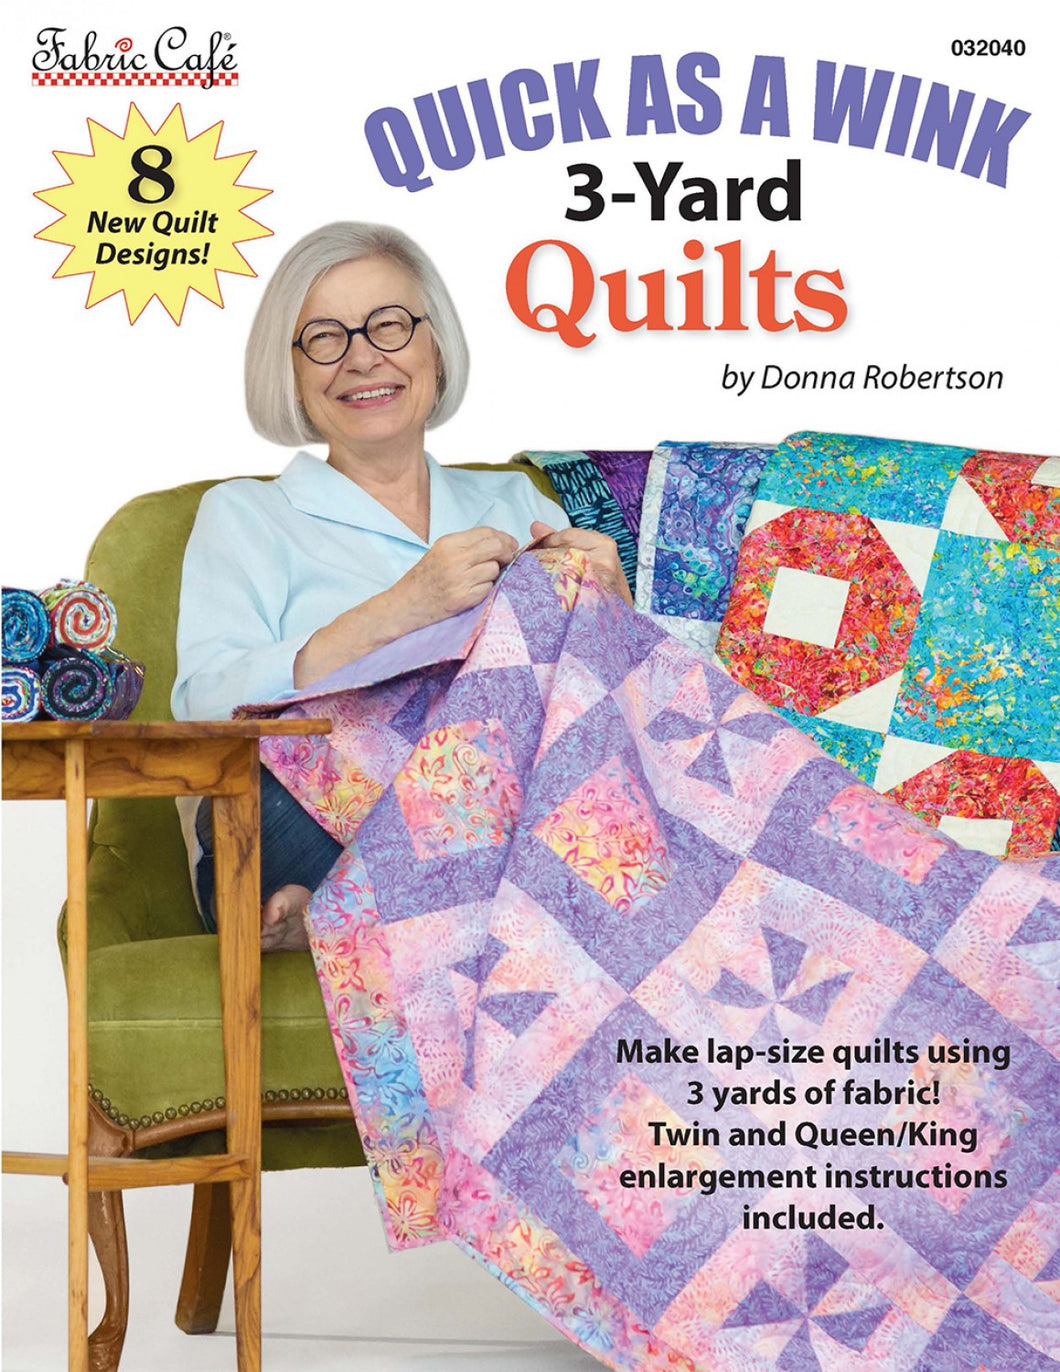 Quick As A Wink 3-Yard Quilts, by Donna Robertson from Fabric Cafe, # FC032040